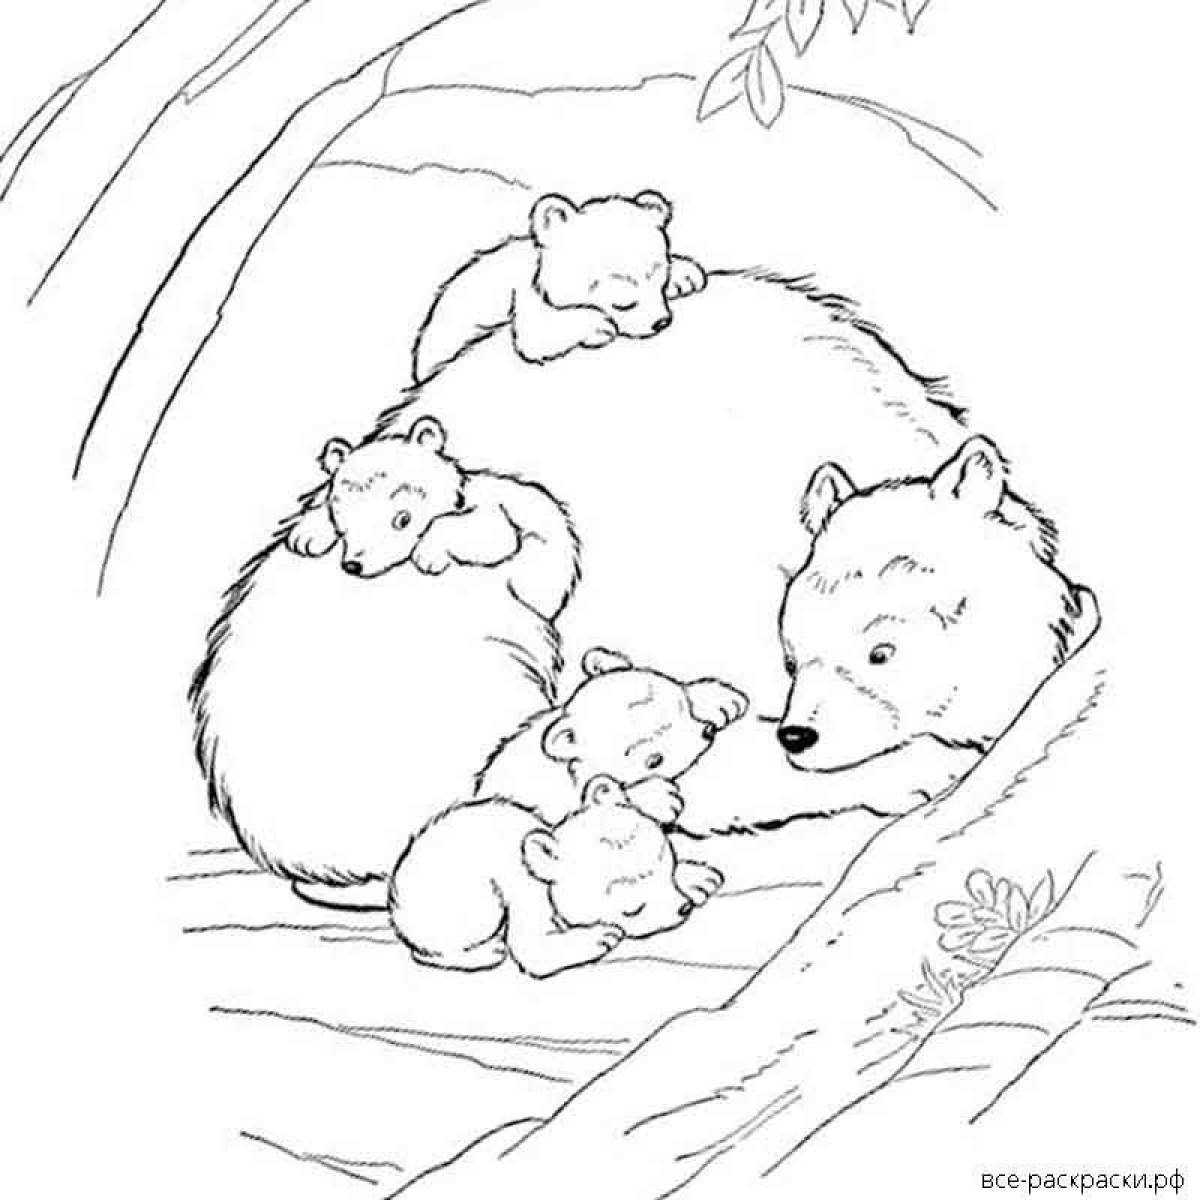 Watchful bear in the den coloring page